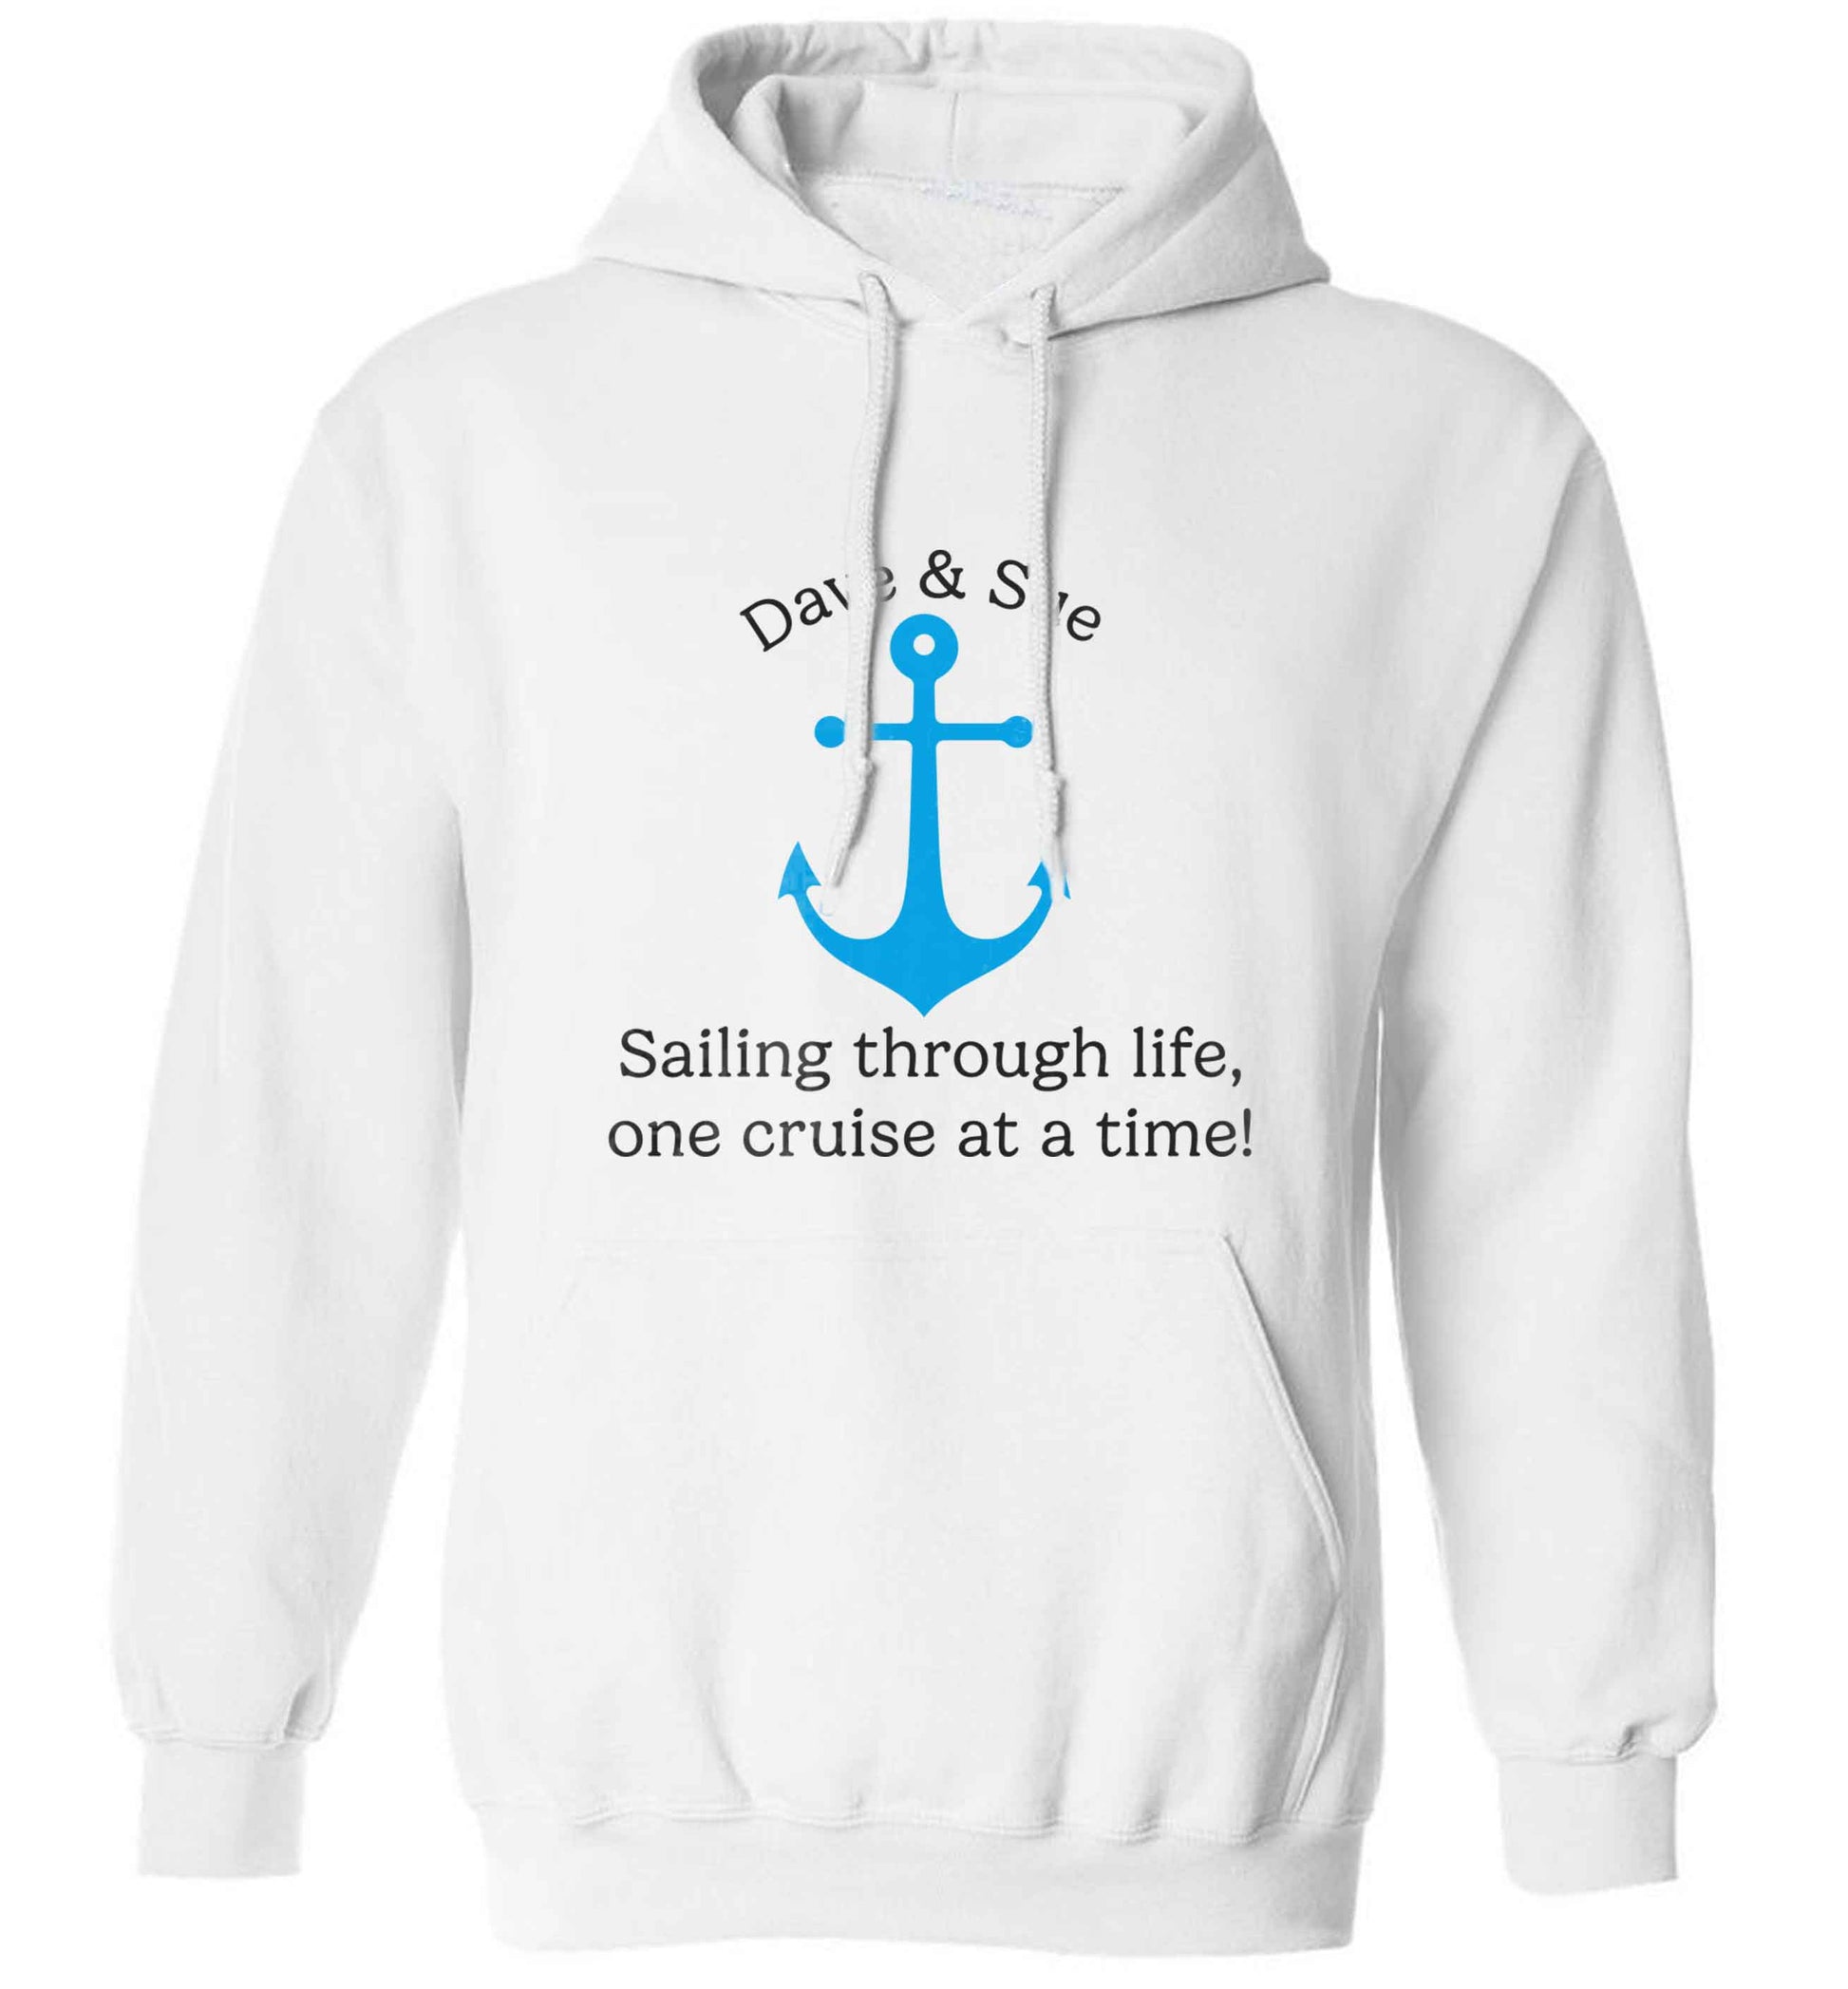 Sailing through life one cruise at a time - personalised adults unisex white hoodie 2XL